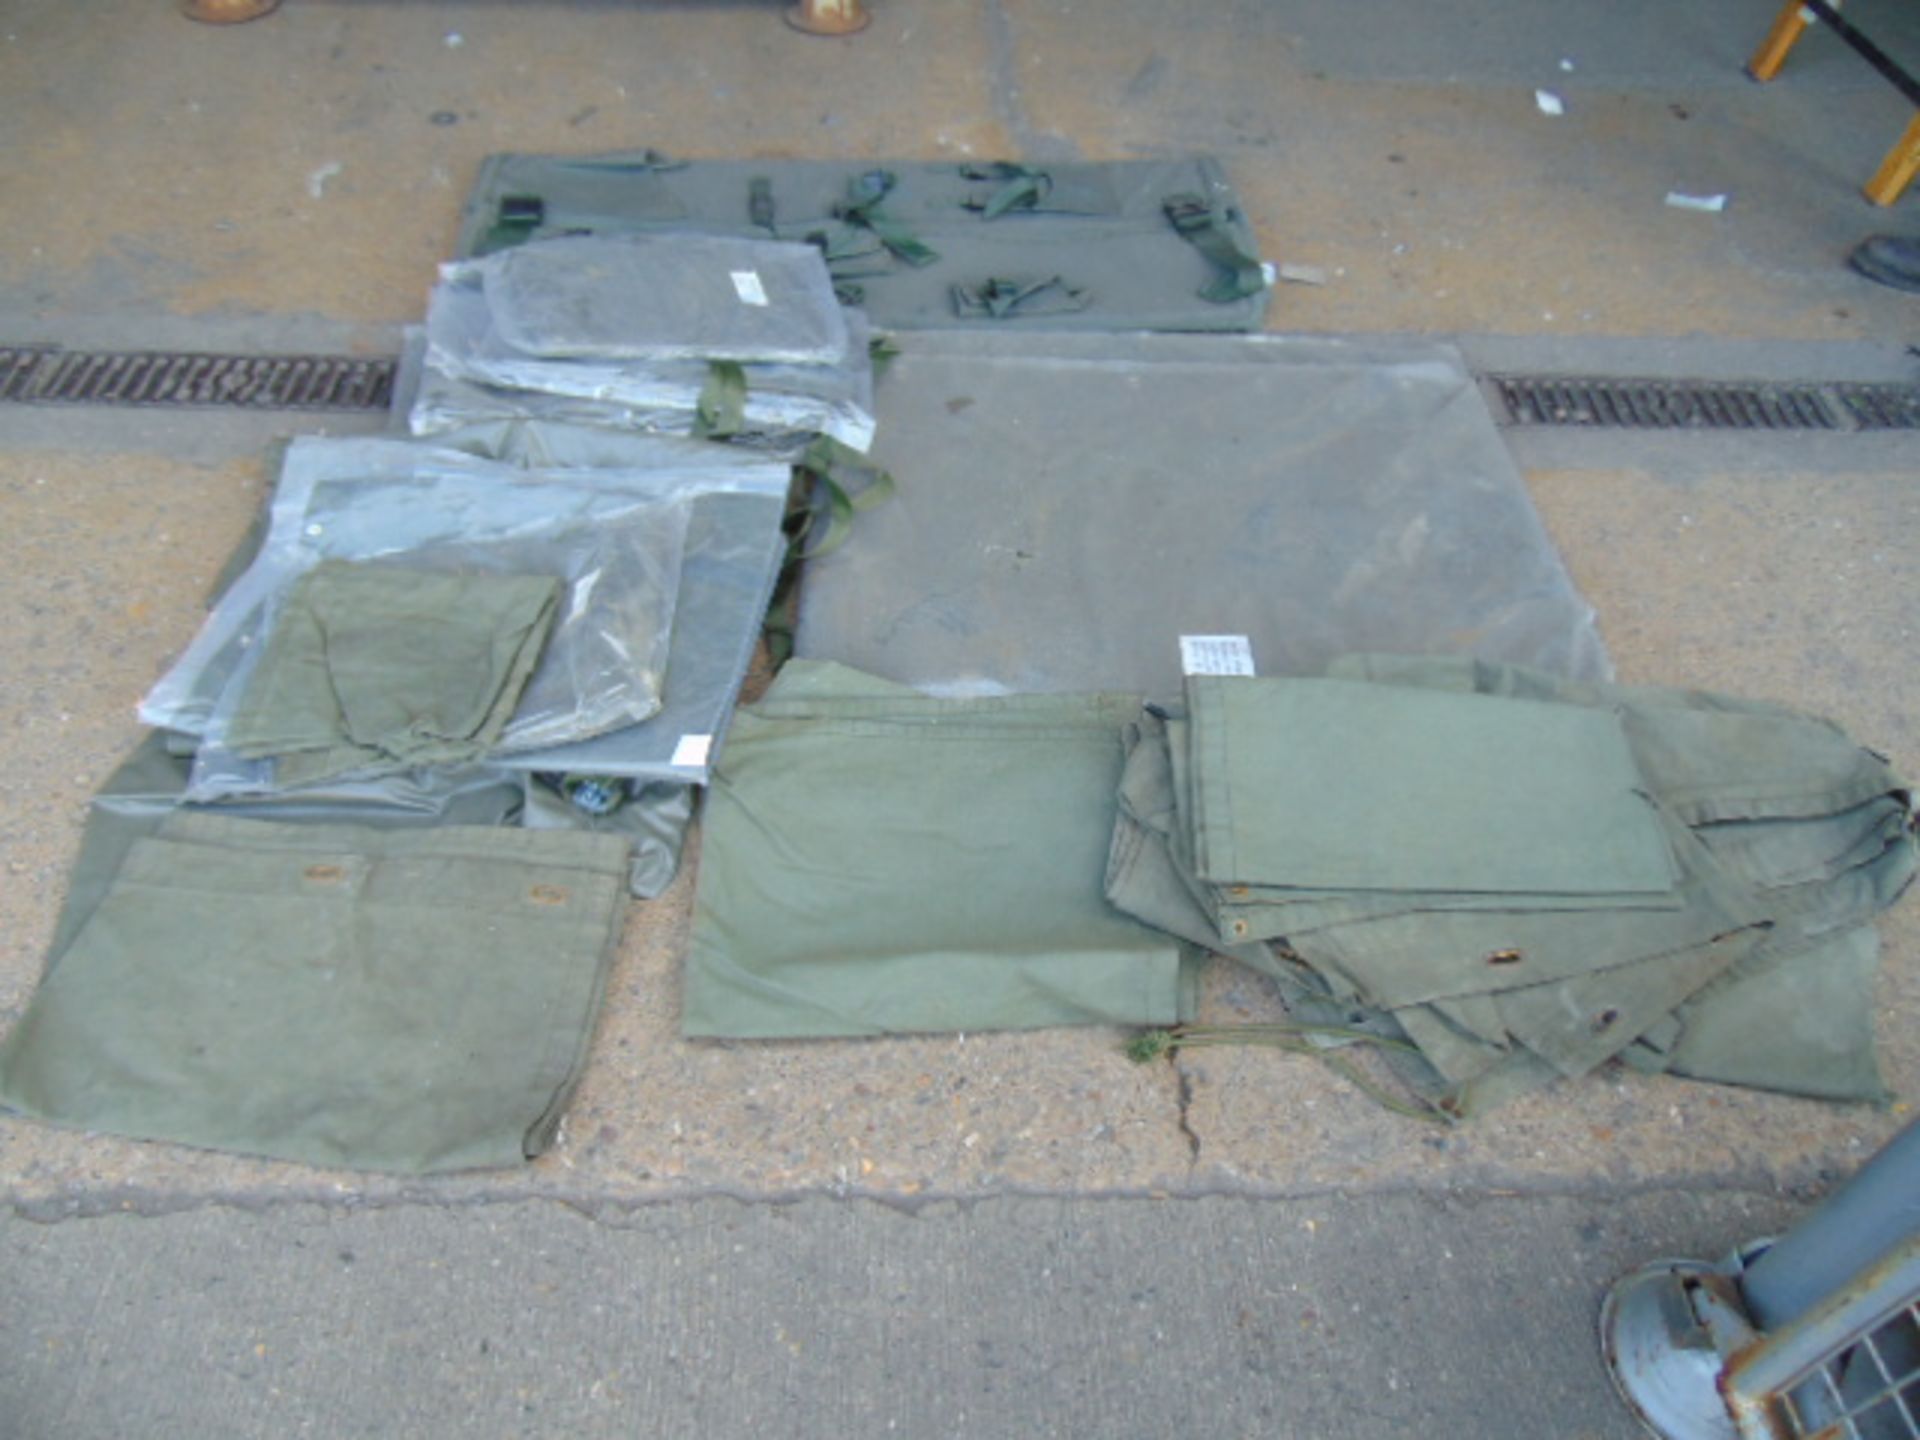 Unissued Vehicle Equipment Bags, Covers, Windscreen Covers Land Rovers etc